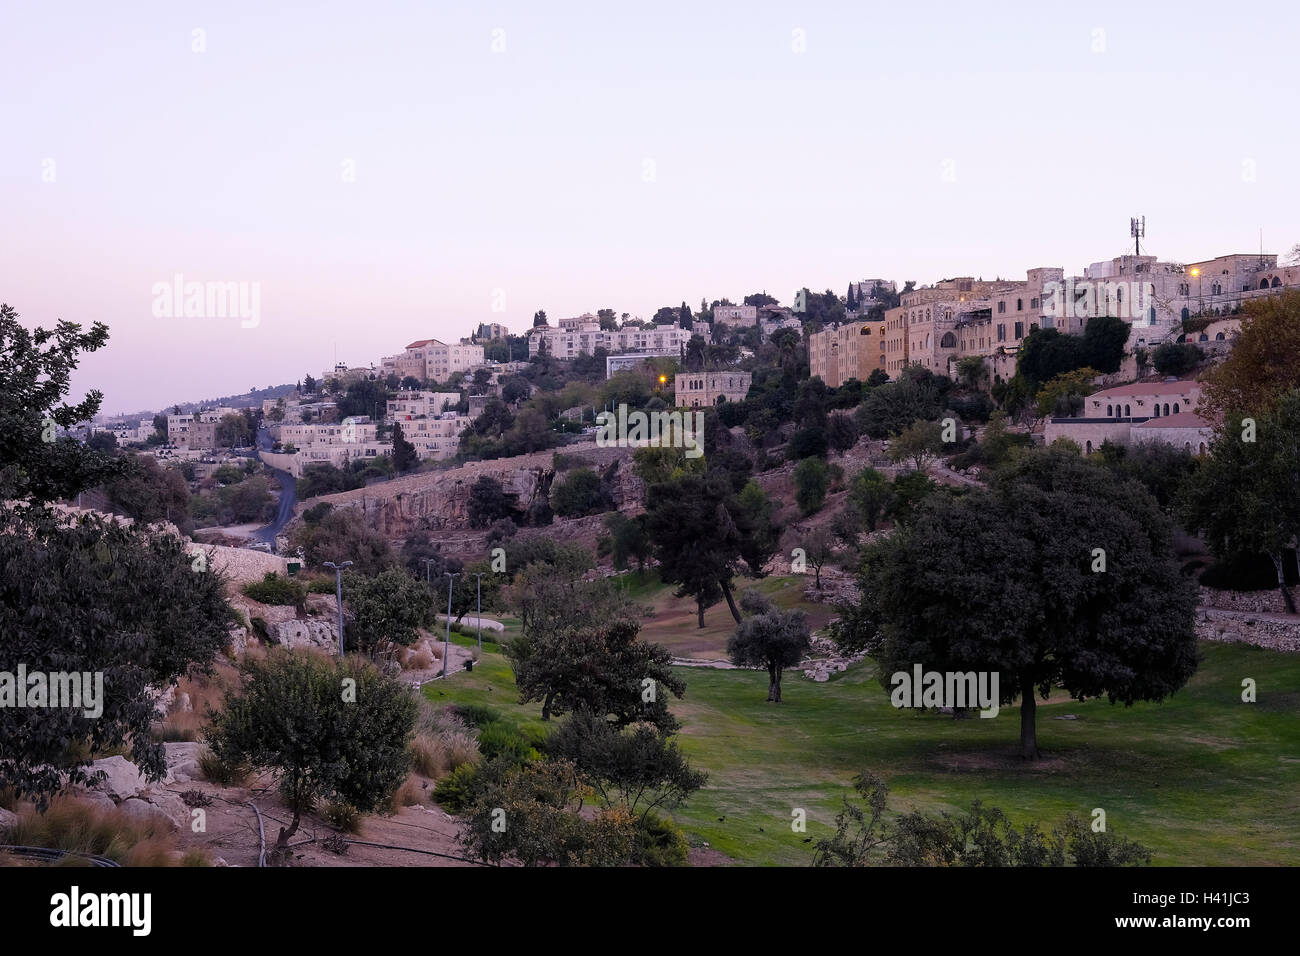 View at twilight of Abu Tor a mixed Jewish and Arab neighborhood located over valley of Hinnom the modern name for the biblical Gehenna or Gehinnom valley surrounding Jerusalem's Old City, Israel Stock Photo